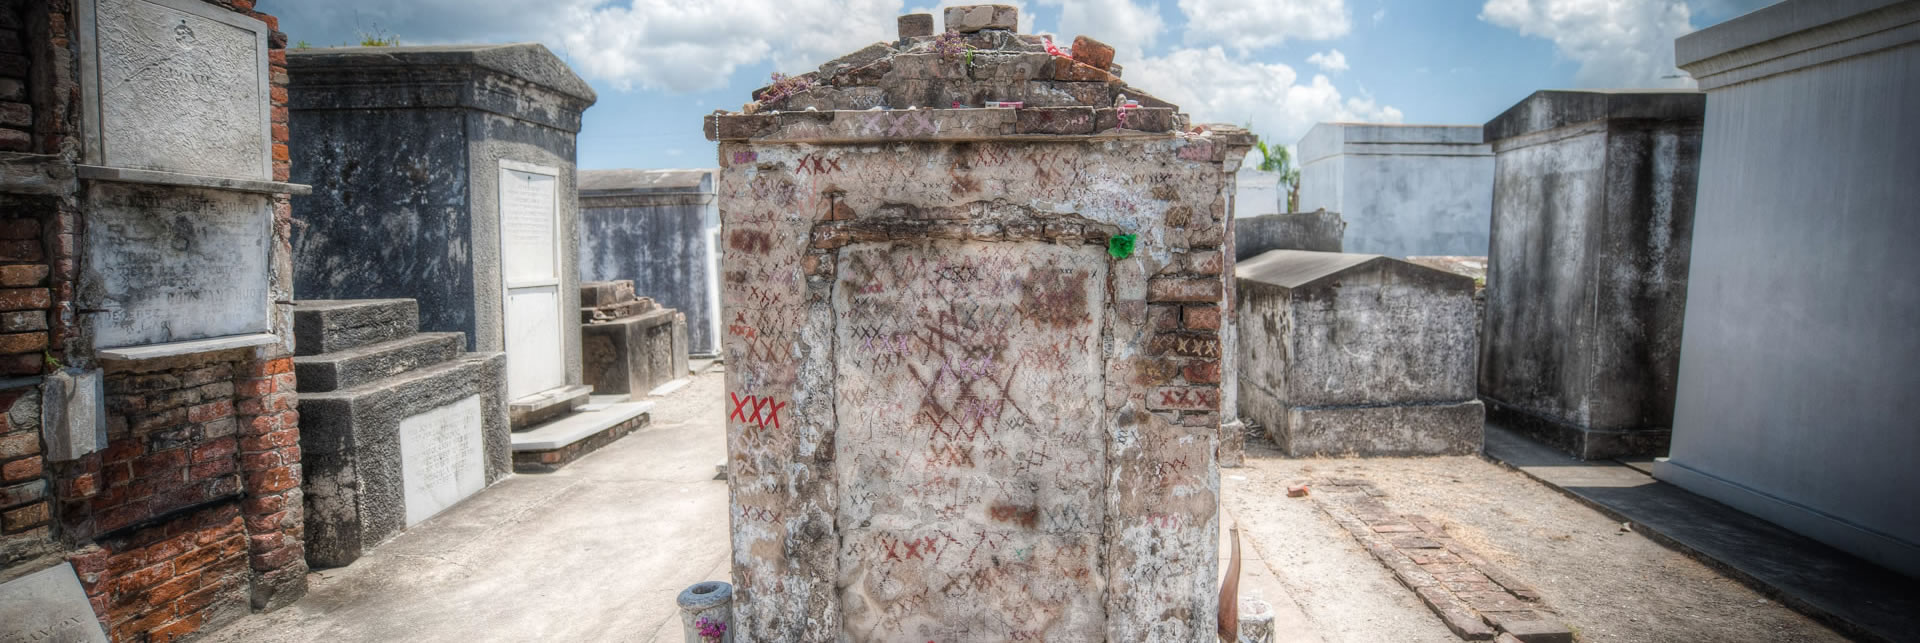 One of the tombs in St. Louis Cemetery Number One